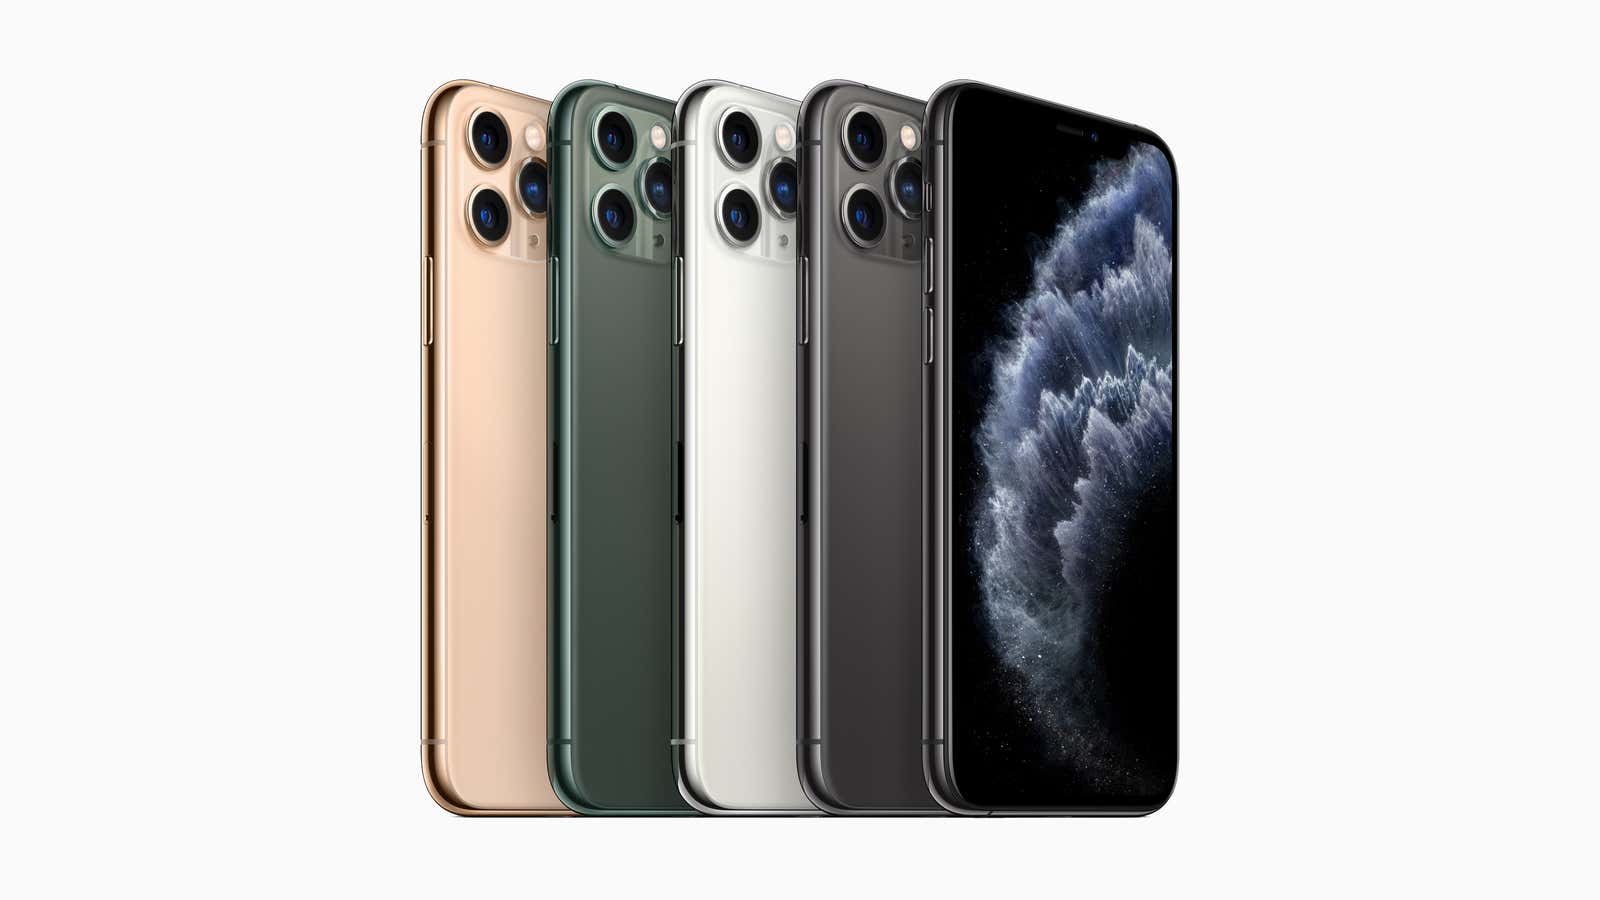 The “Pro” rainbow of the iPhone 11 Pro.